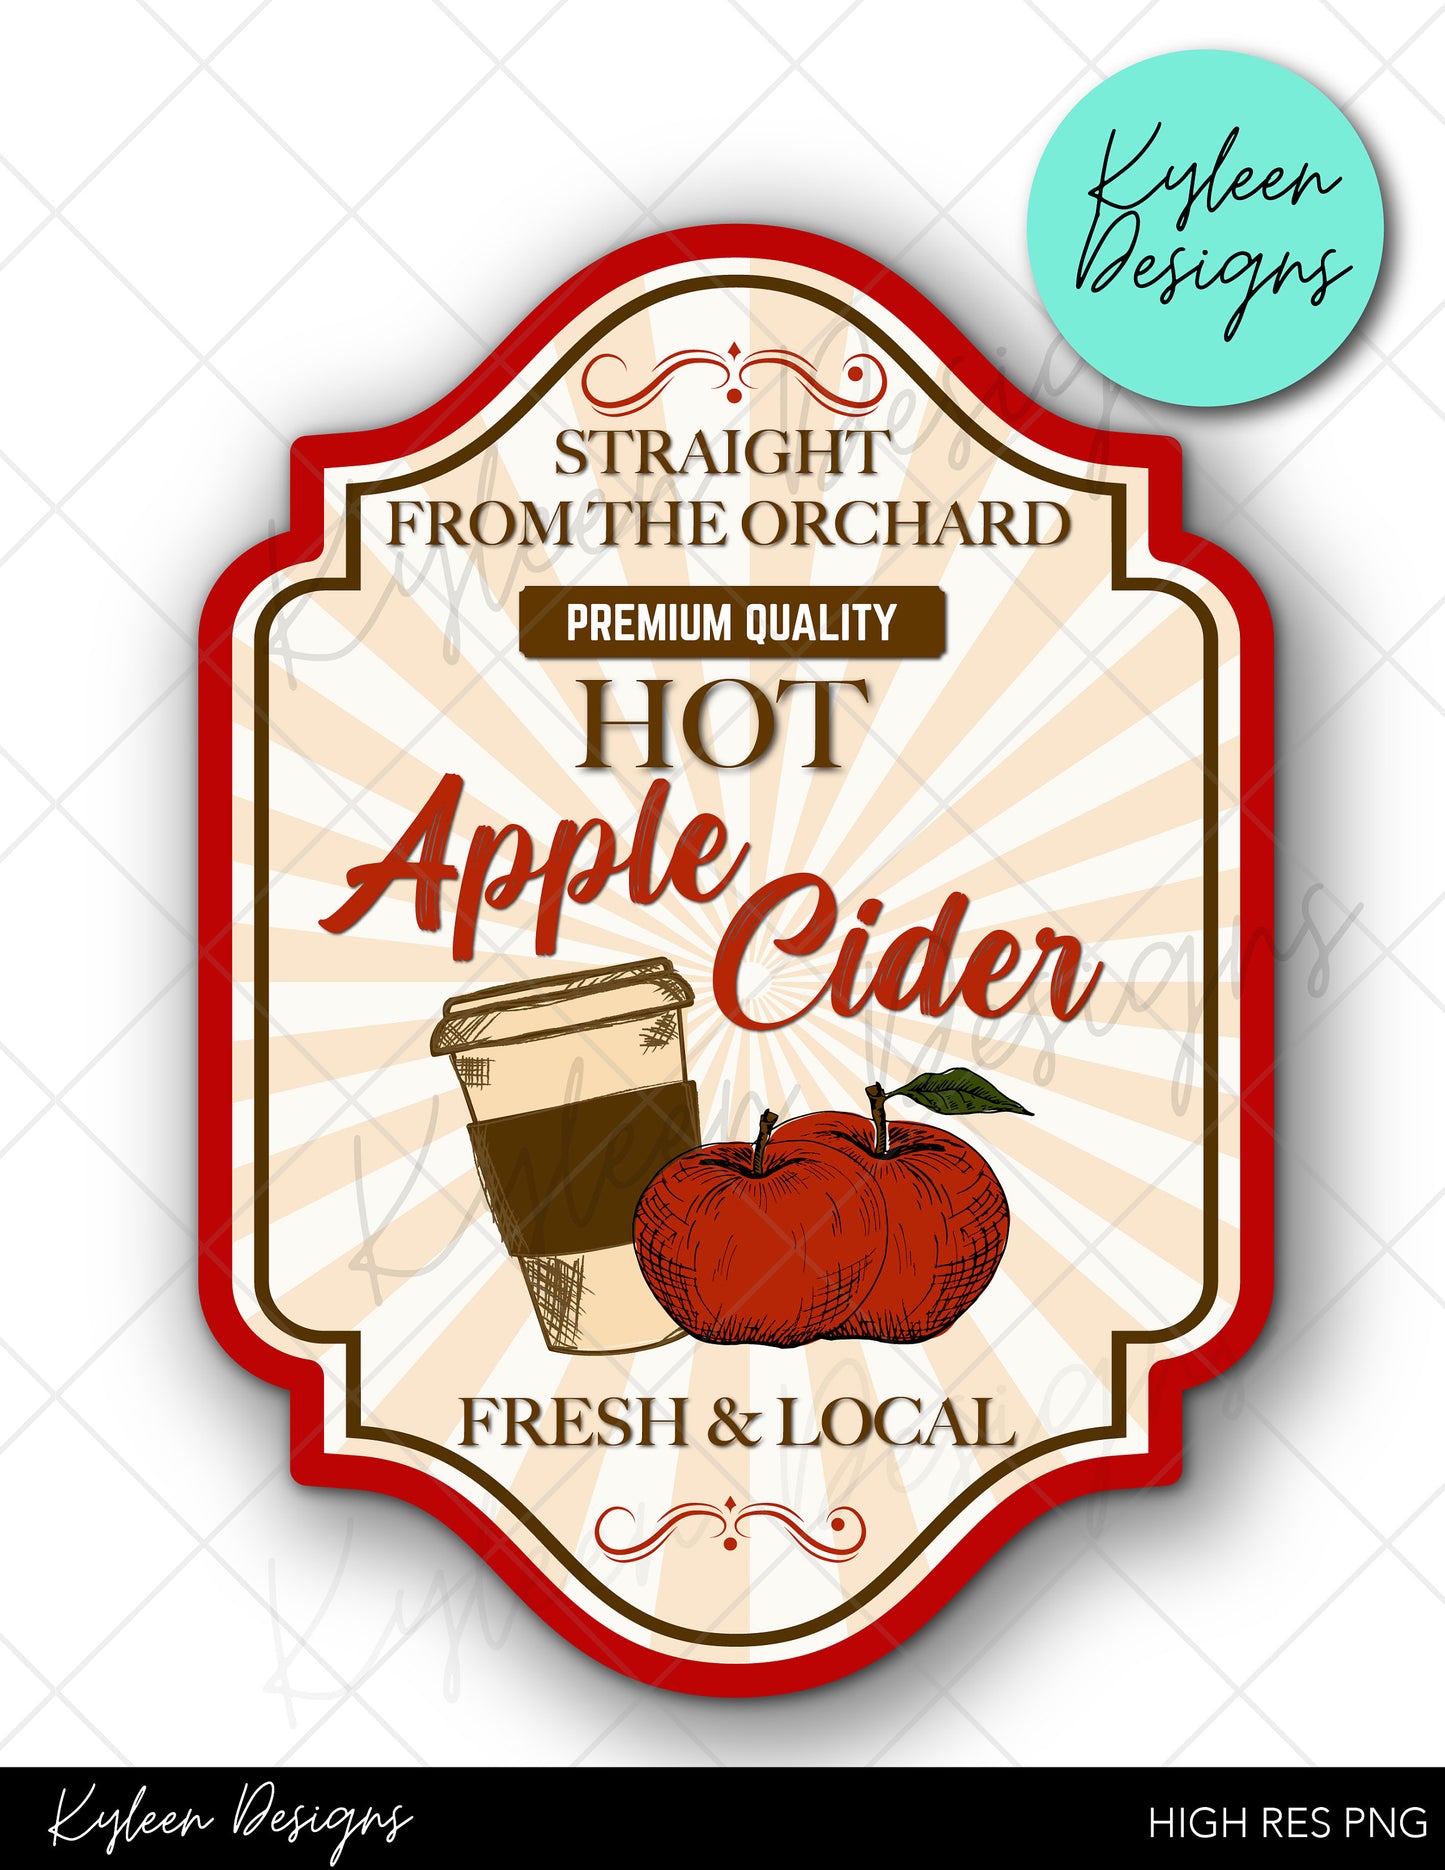 Apple cider label High RES PNG for coffee/beer glass